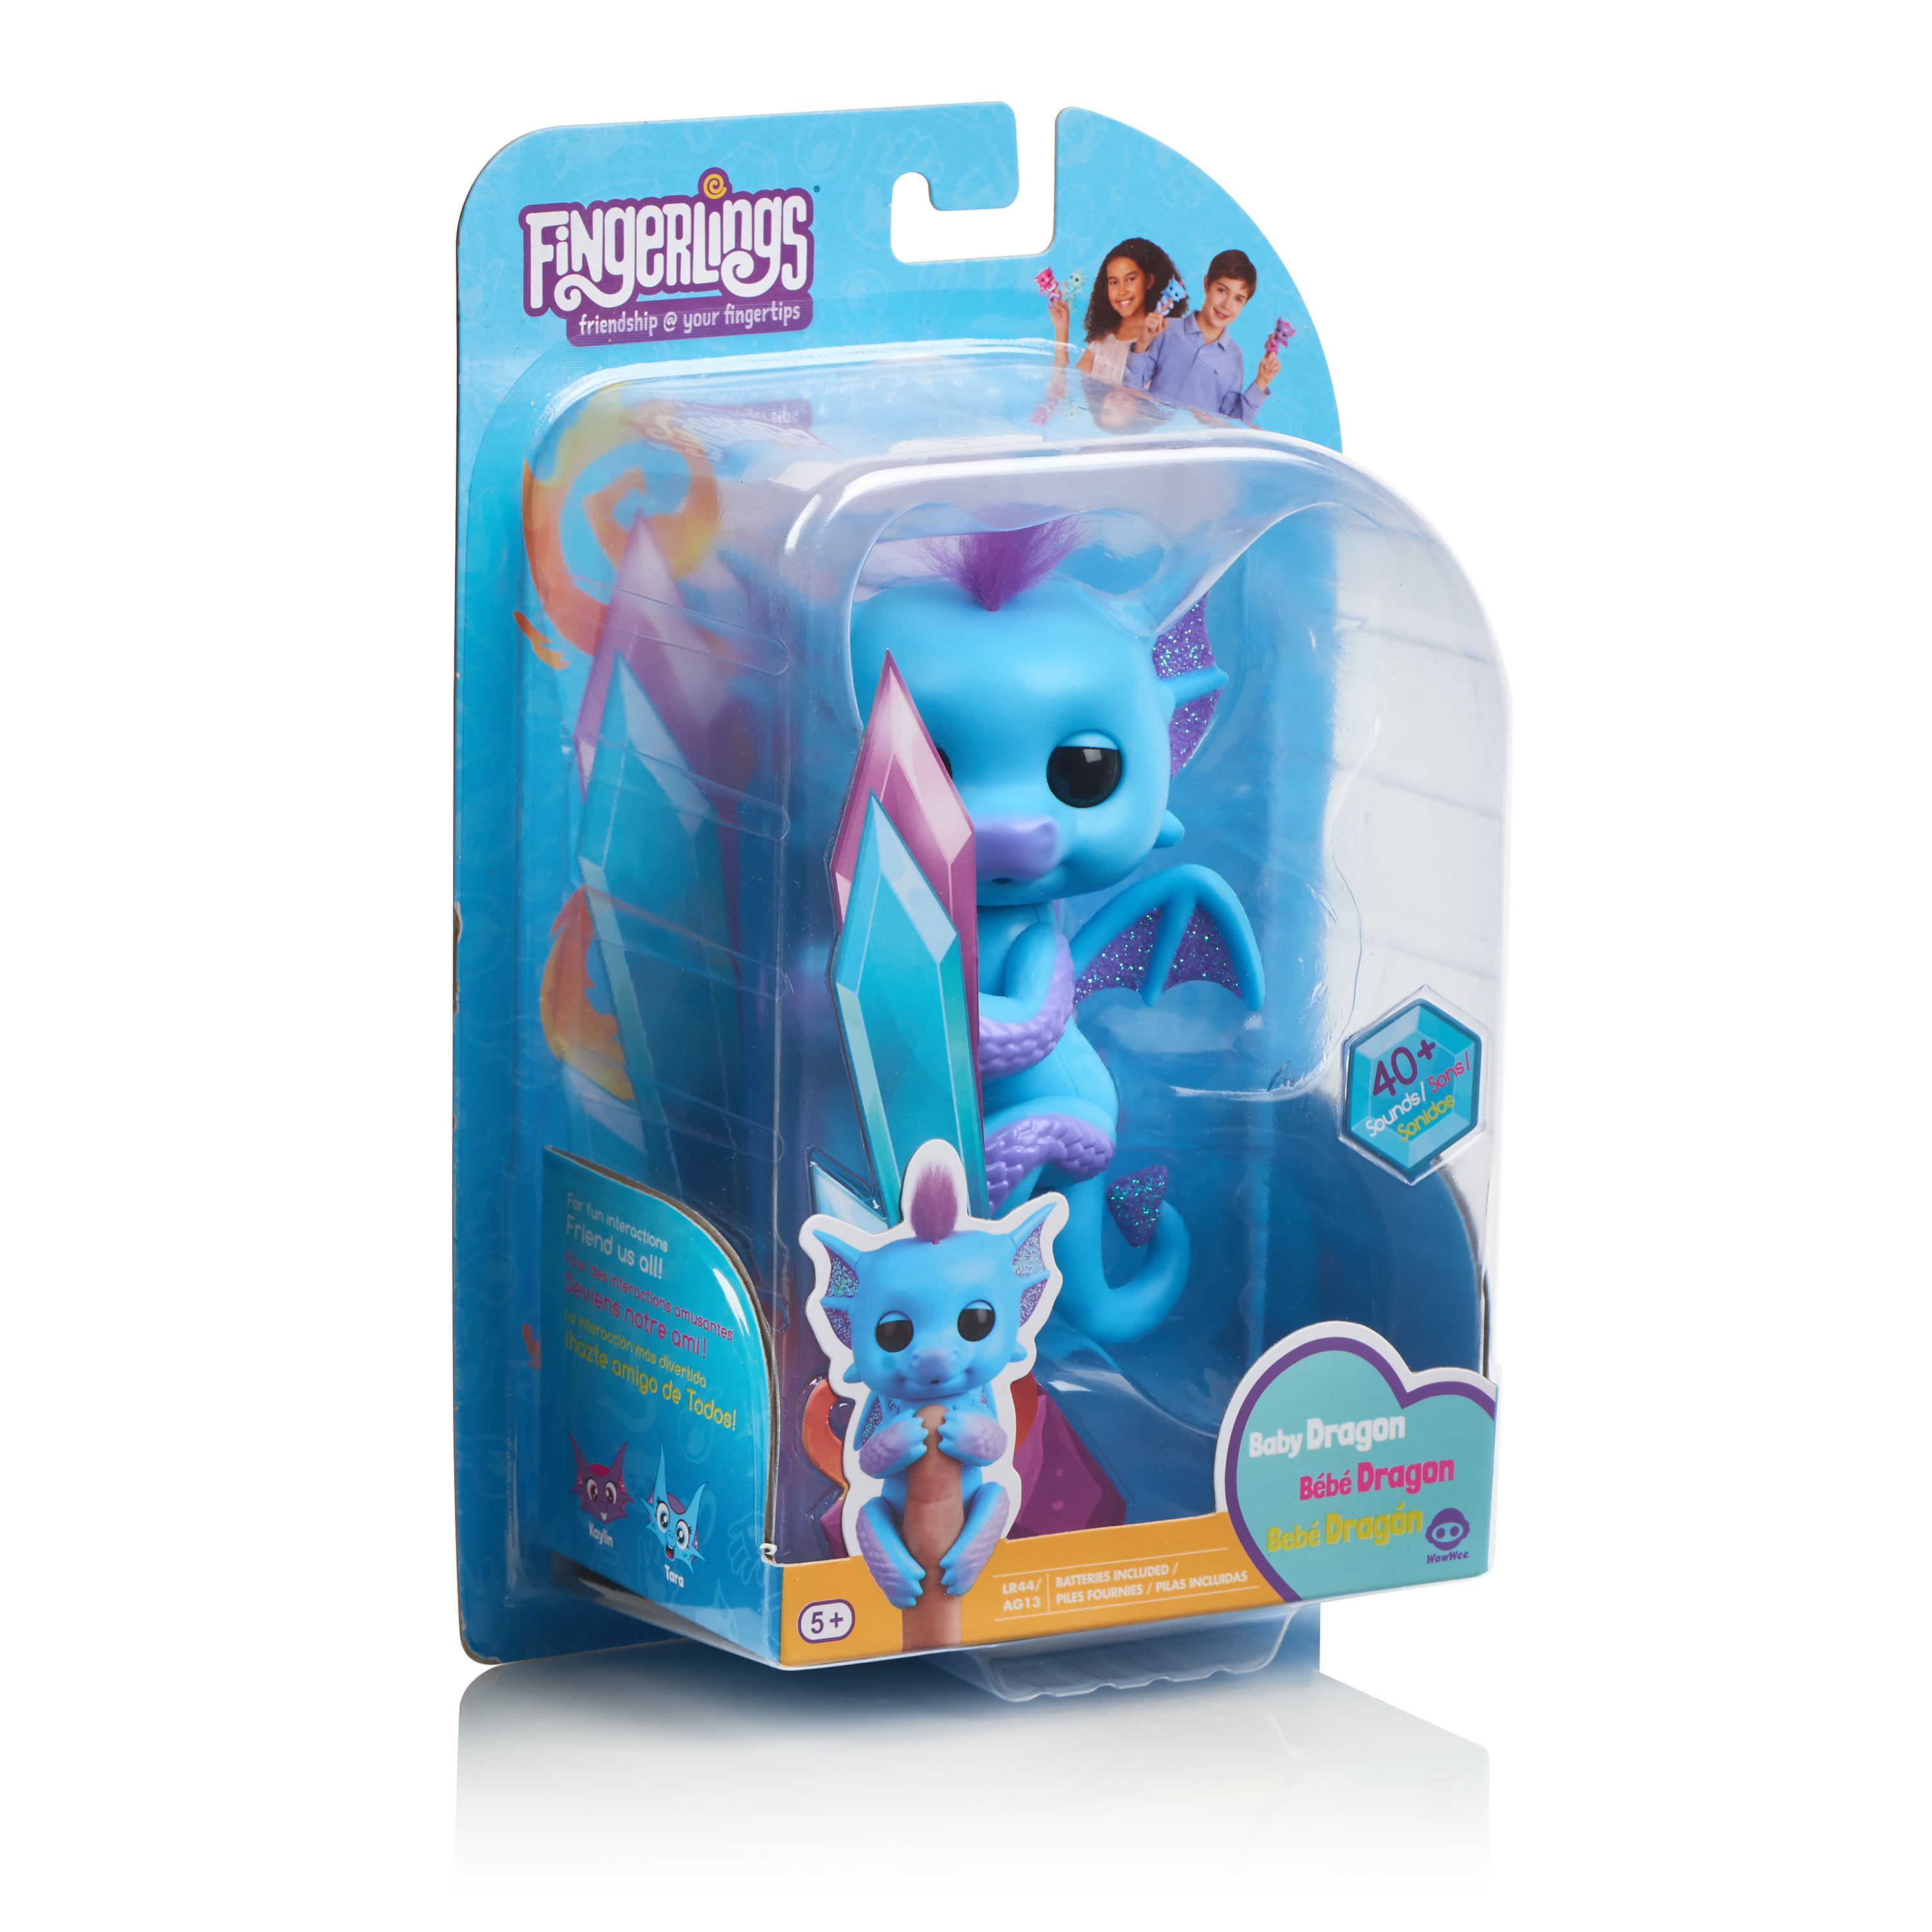 WowWee Fingerlings Null by Glitter Dragon Tara Blue with Purple - Interactive Baby Collectible Pet 